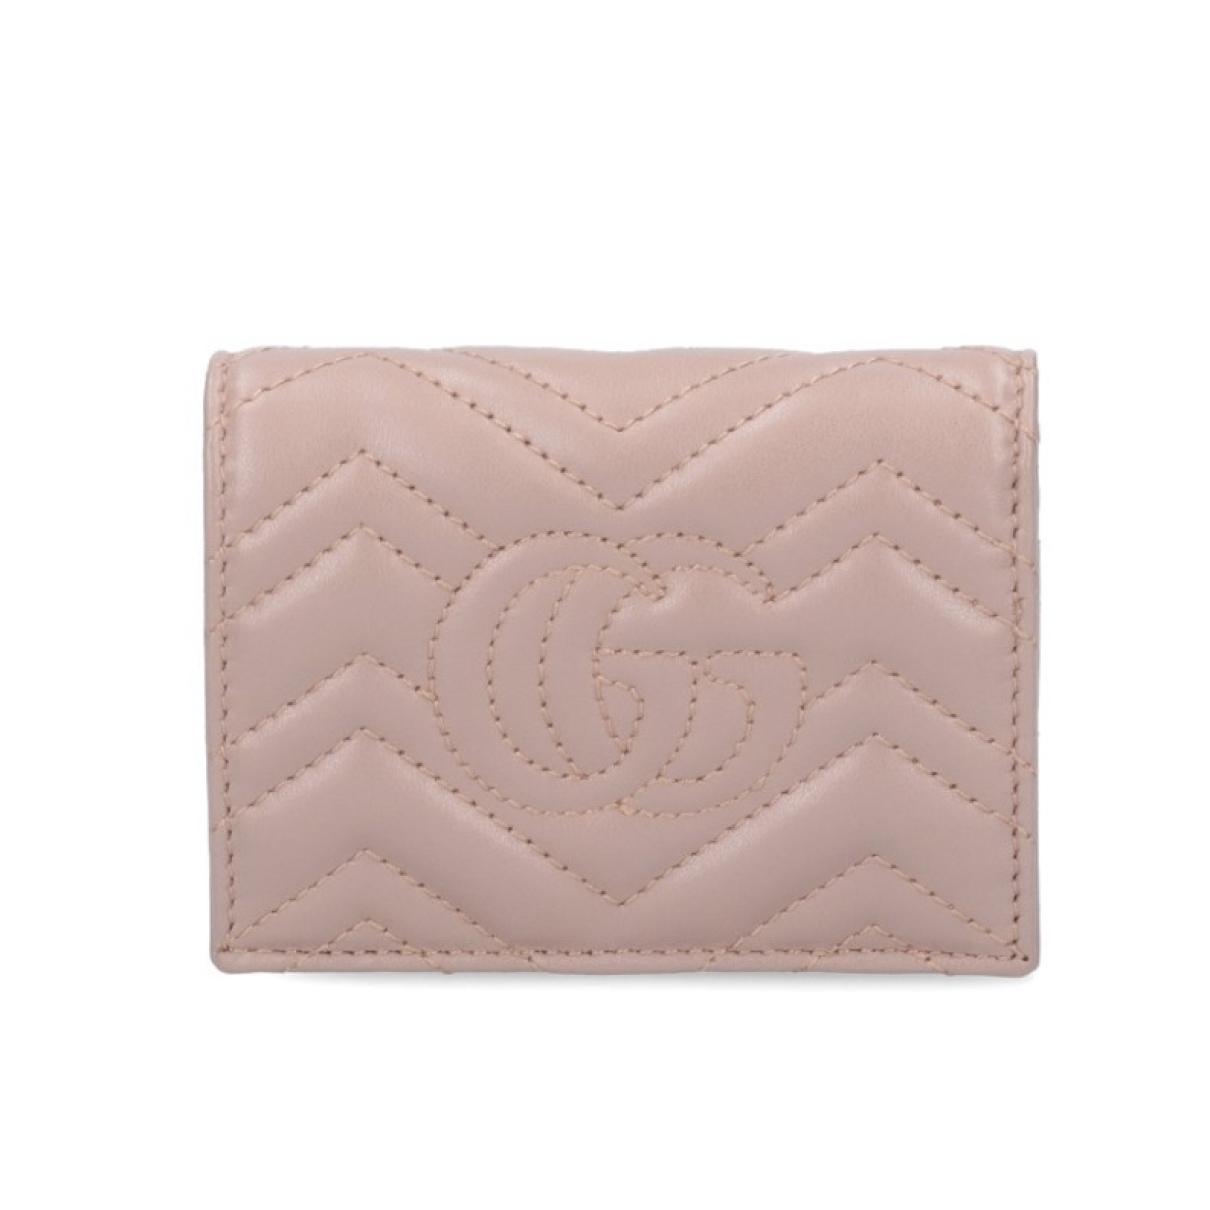 Marmont leather card wallet - 2